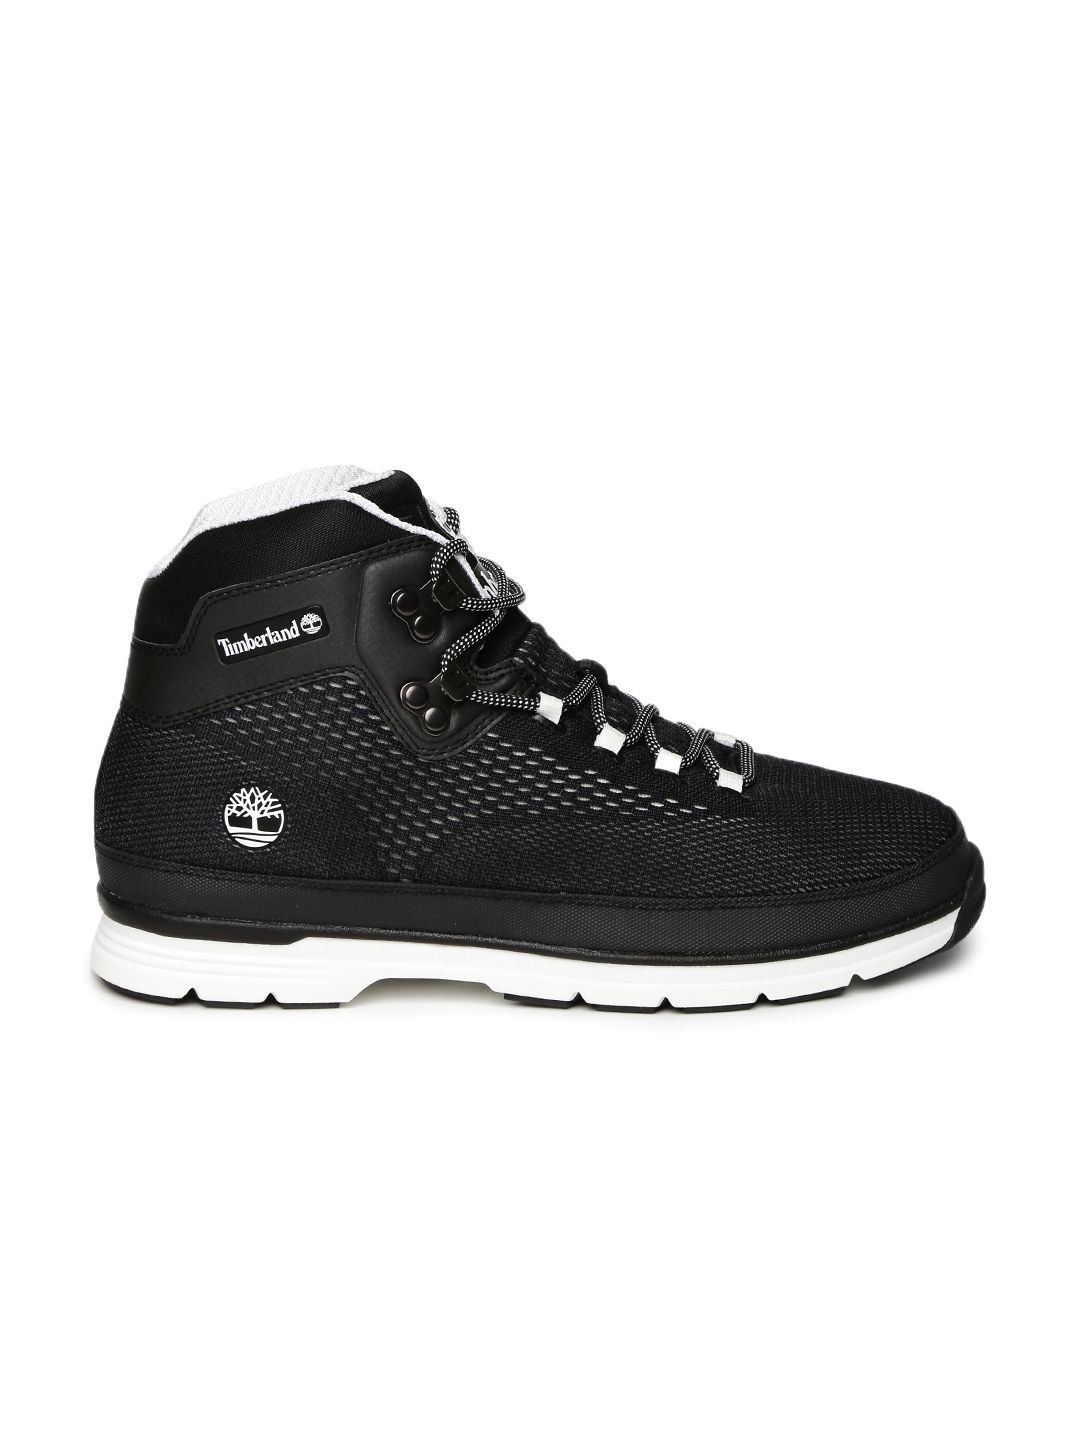 Timberland Black Casual Shoes - Buy Timberland Black Casual Shoes ...